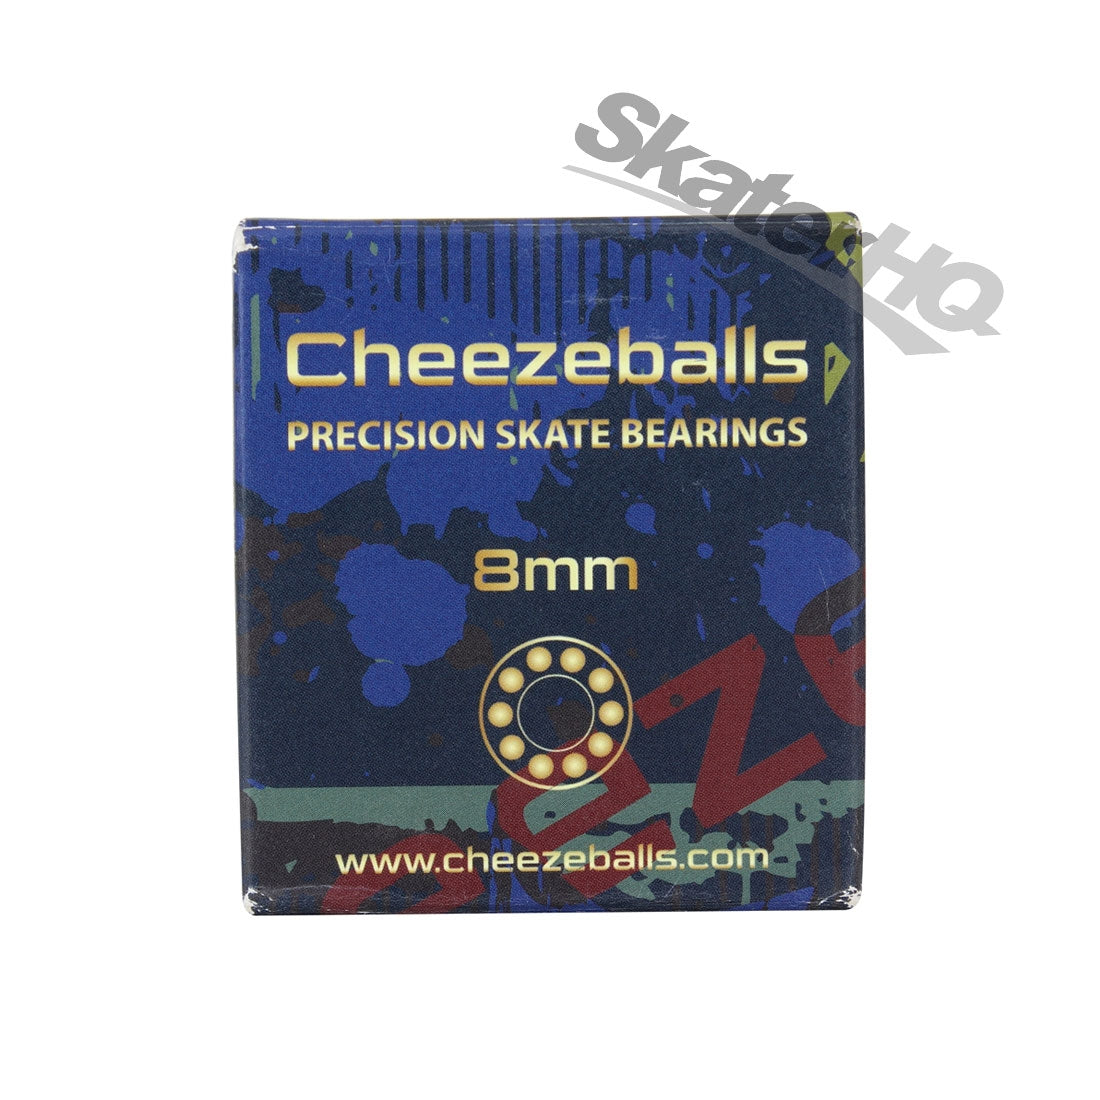 Cheezeballs Cheddars 8mm Bearings 16pk Inline and Quad Bearings